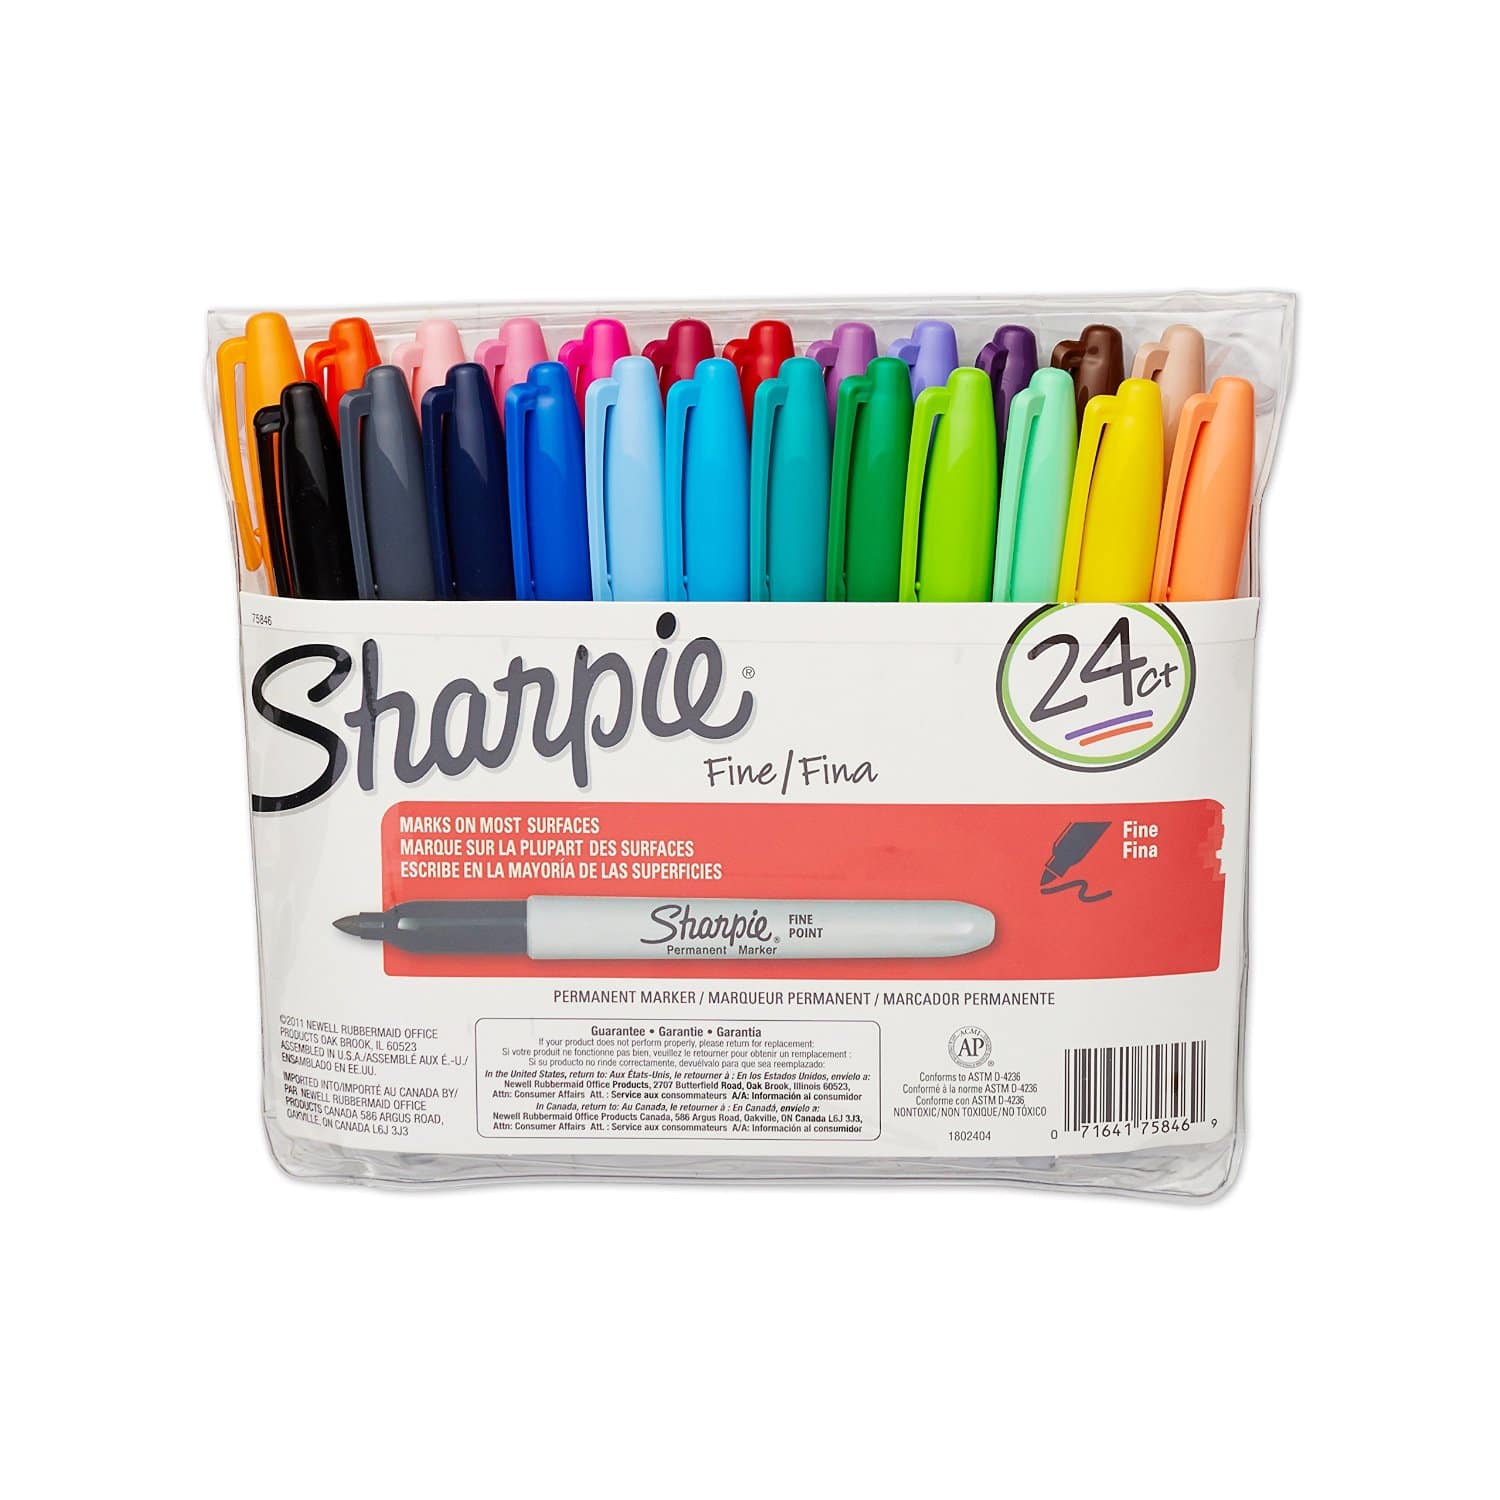 DEAL ALERT: 24 pk of Sharpies for $1 with FREE Shipping!